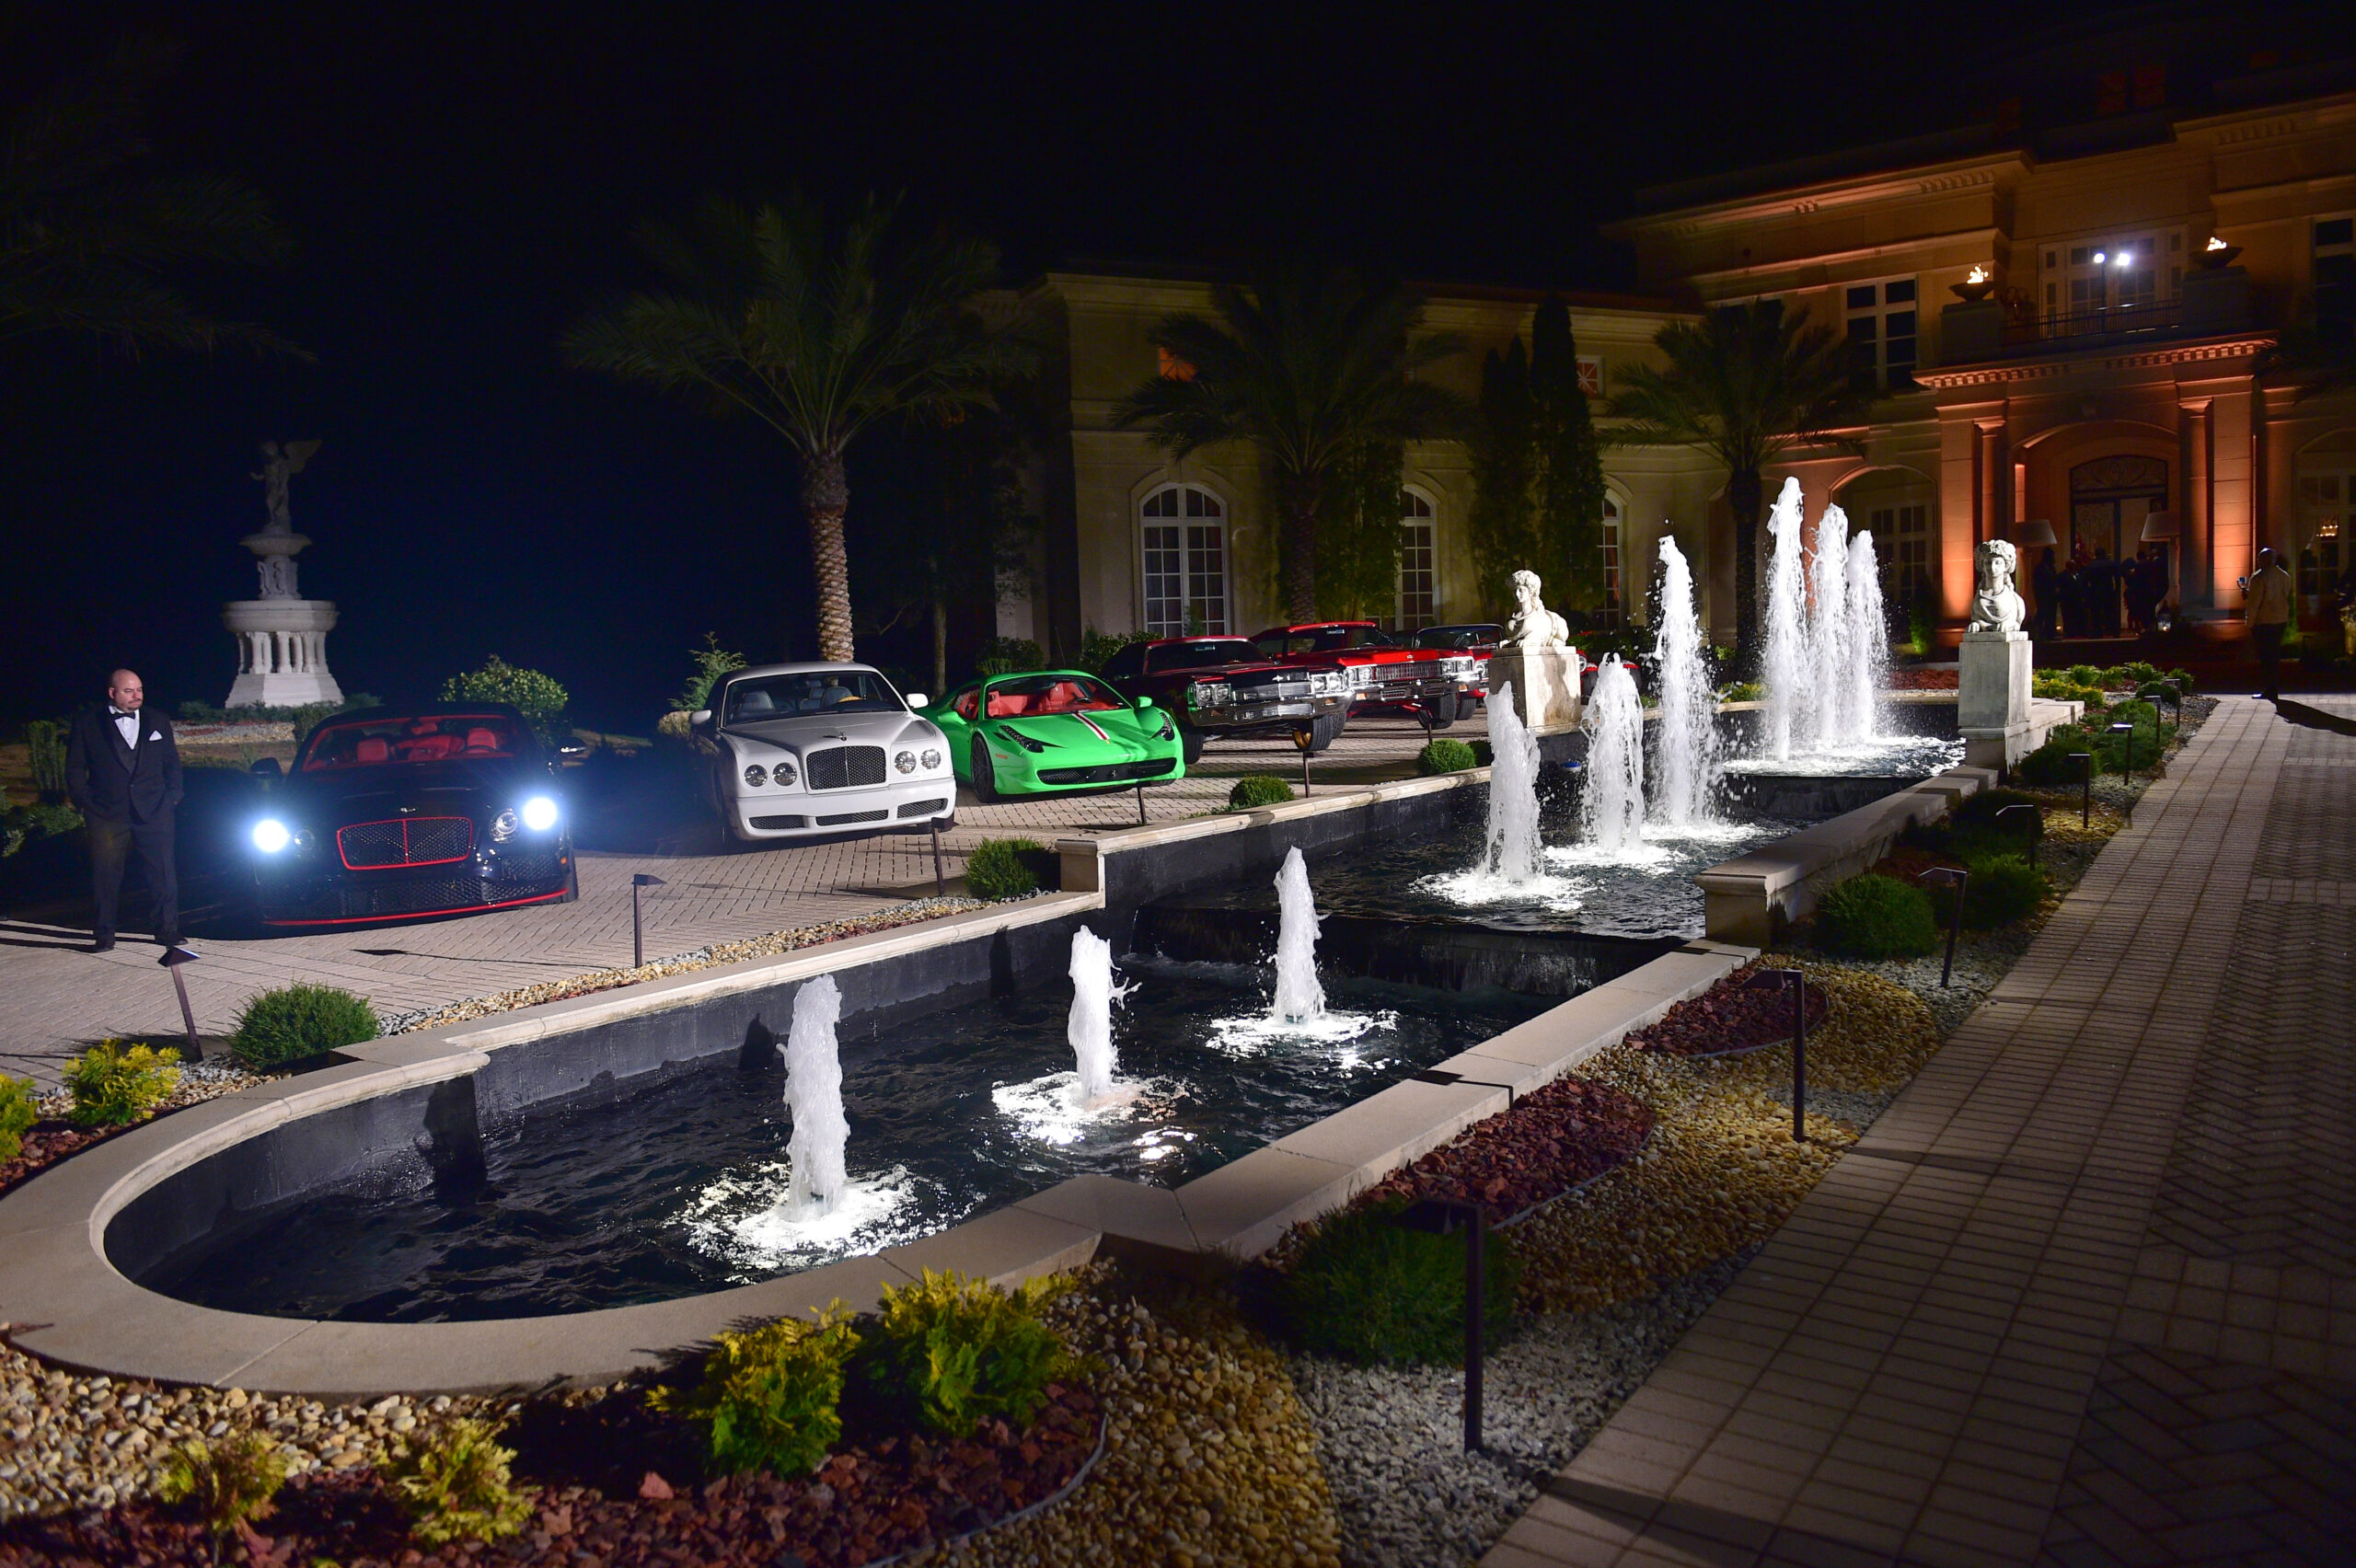 Take a look inside Rick Ross' massive Georgia house. Pictured: An outside view of his mansion and car collection.